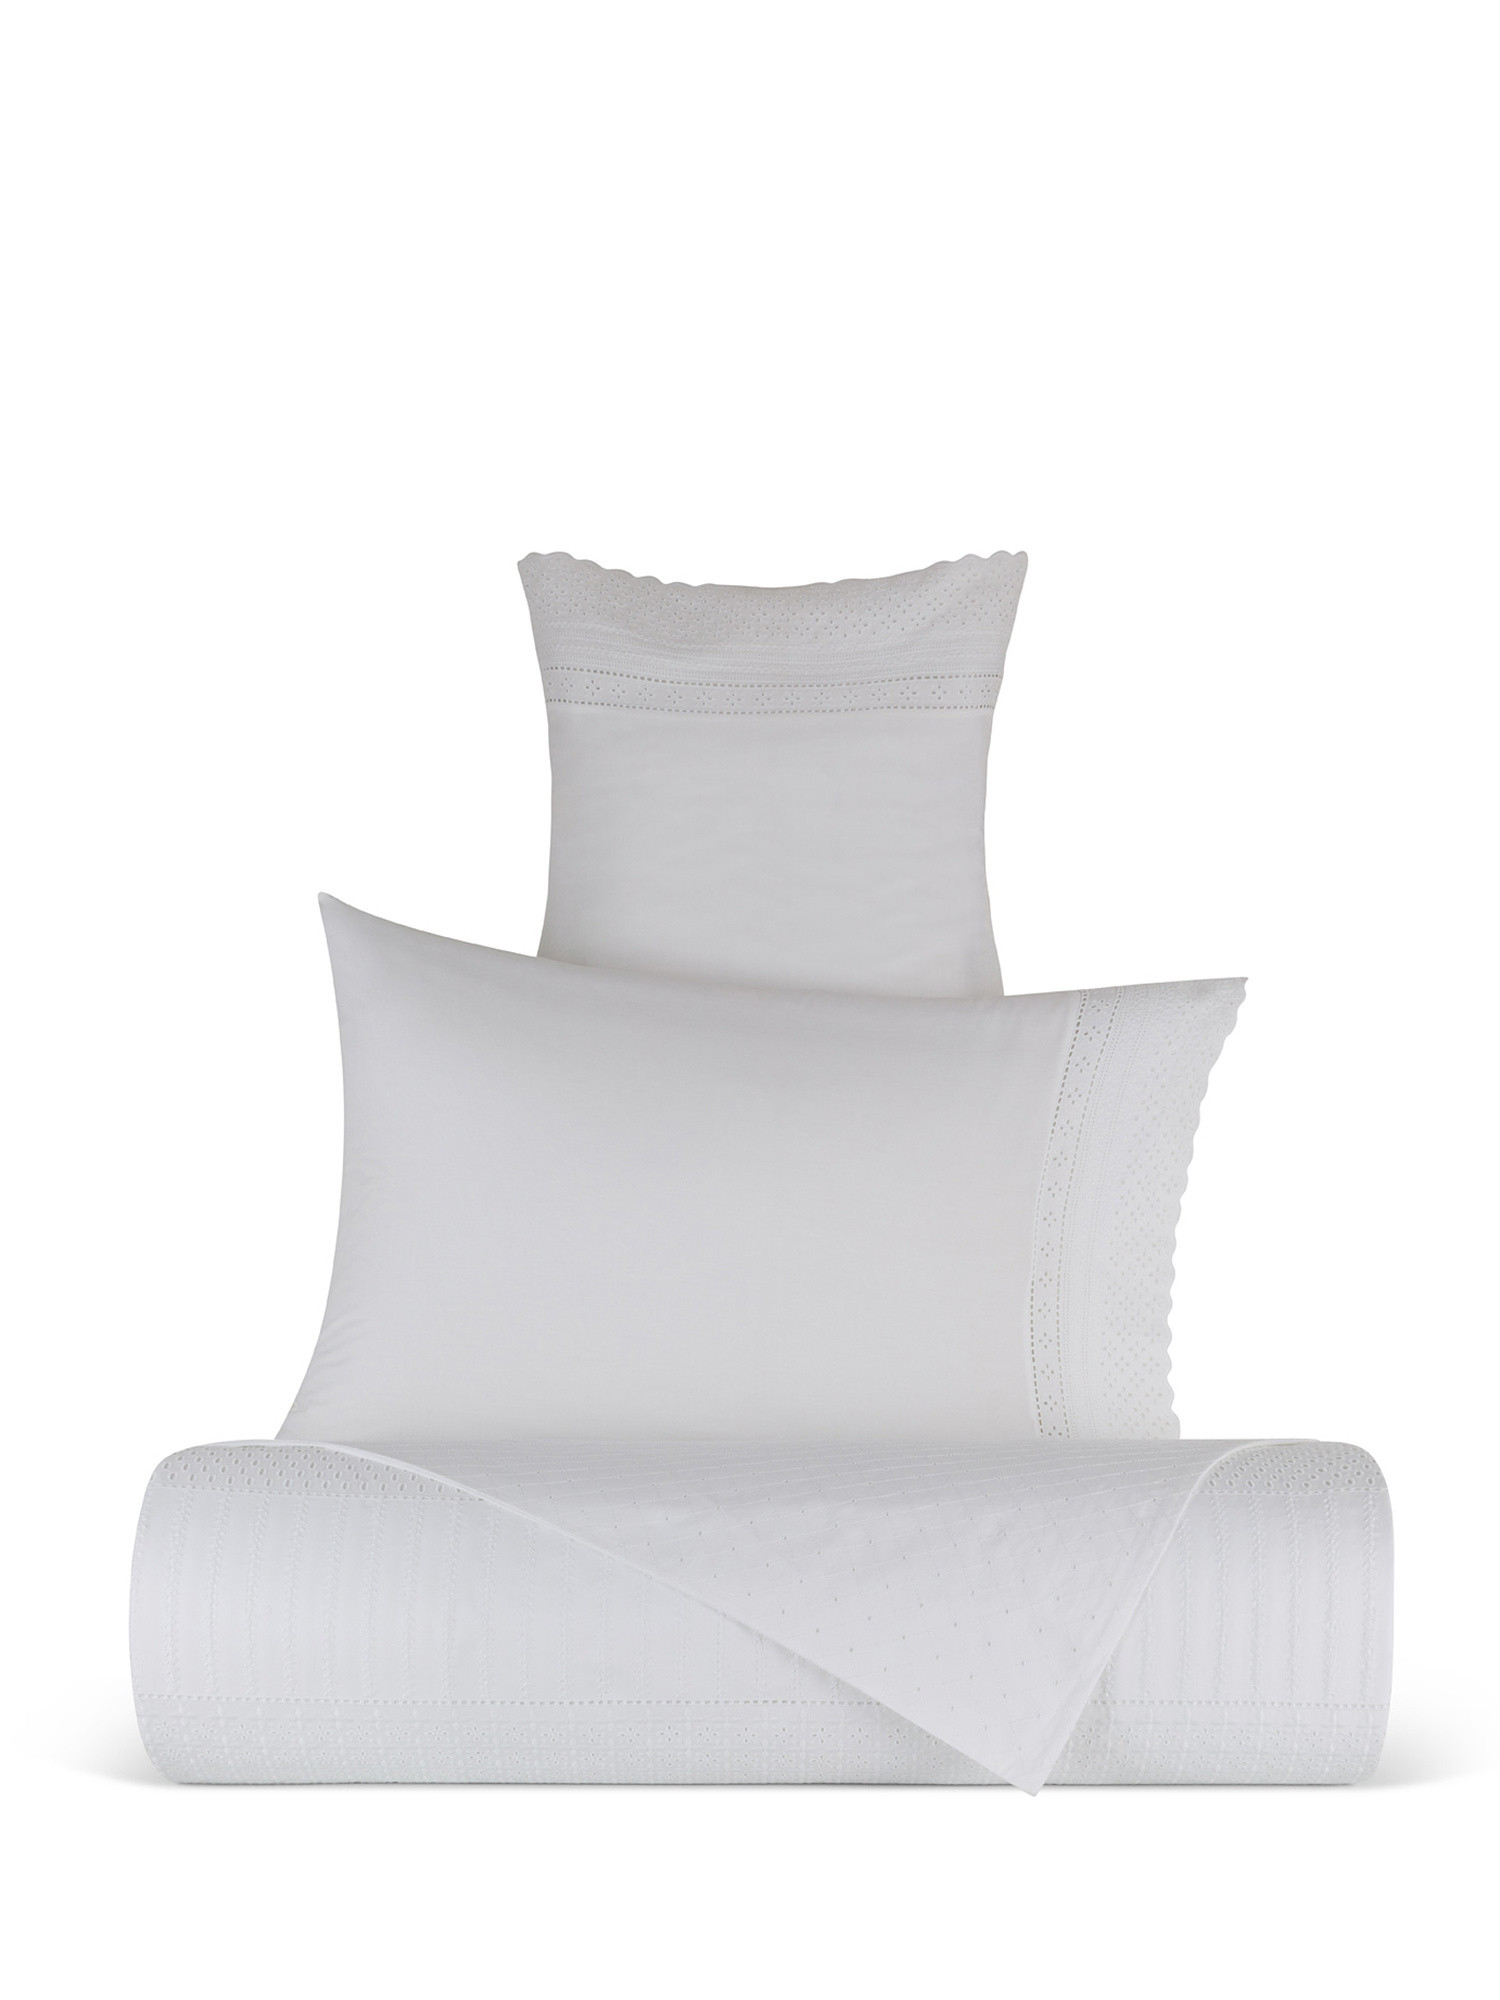 Portofino duvet cover in 100% cotton percale with Sangallo lace, White, large image number 0